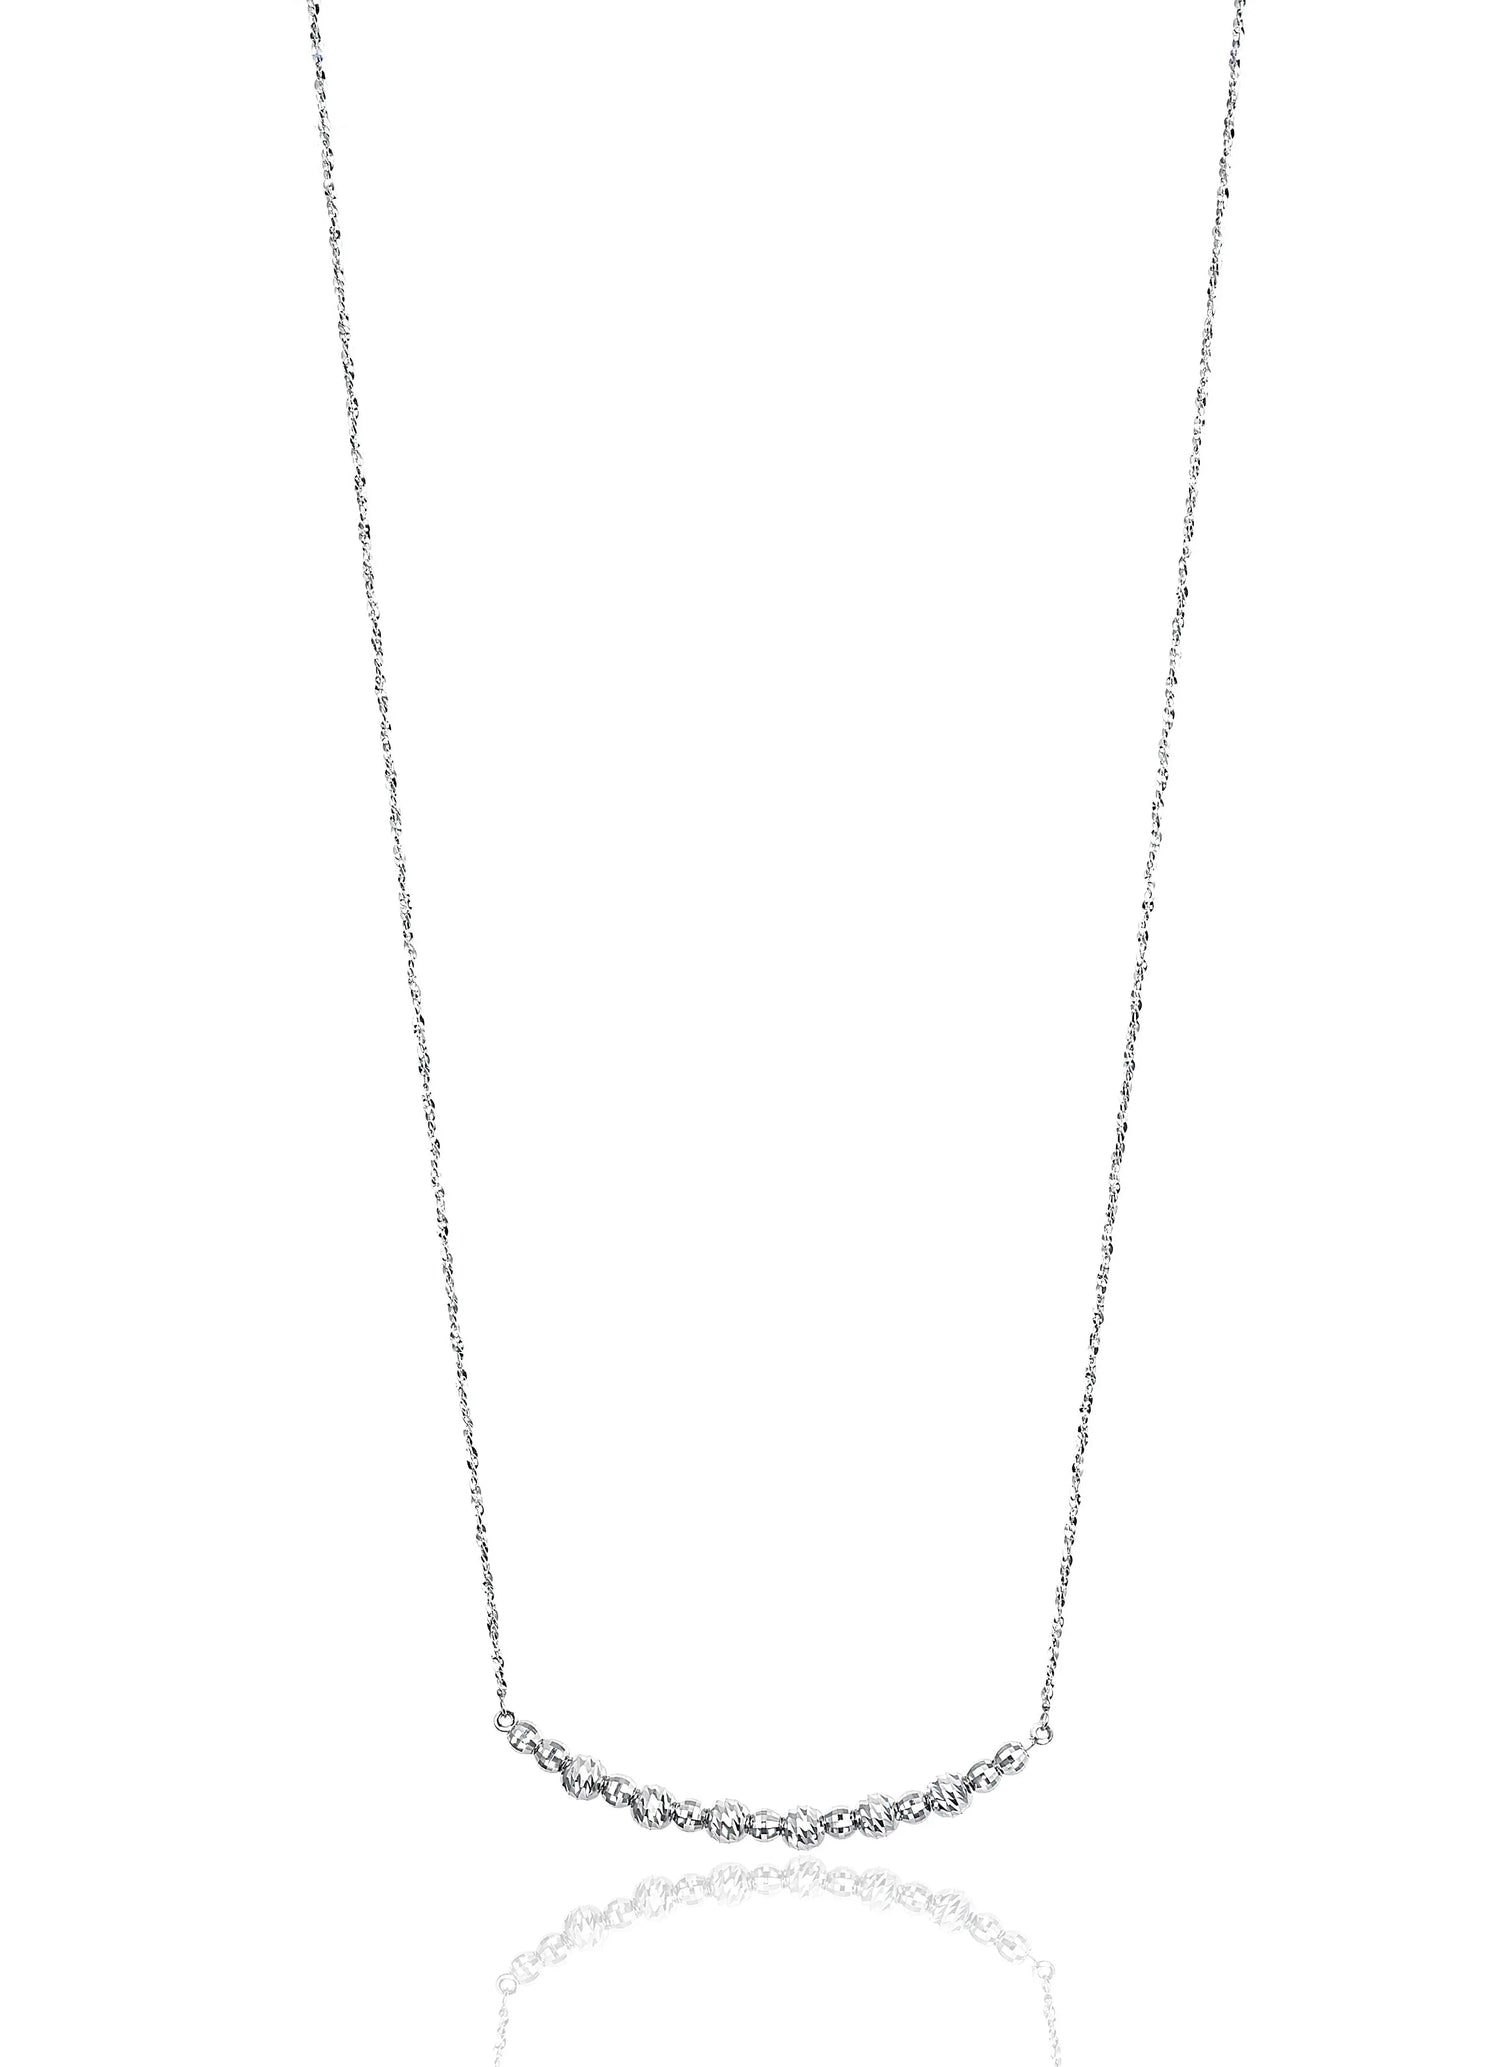 The ultimate timeless classic, Lisette features graduated, brilliant-cut beads threaded by hand into a smile ornament in the center. Held by a delicate, adjustable chain, the Lisette can be lengthened or shortened to wear as a necklace or choker. Designed by Platinum Born